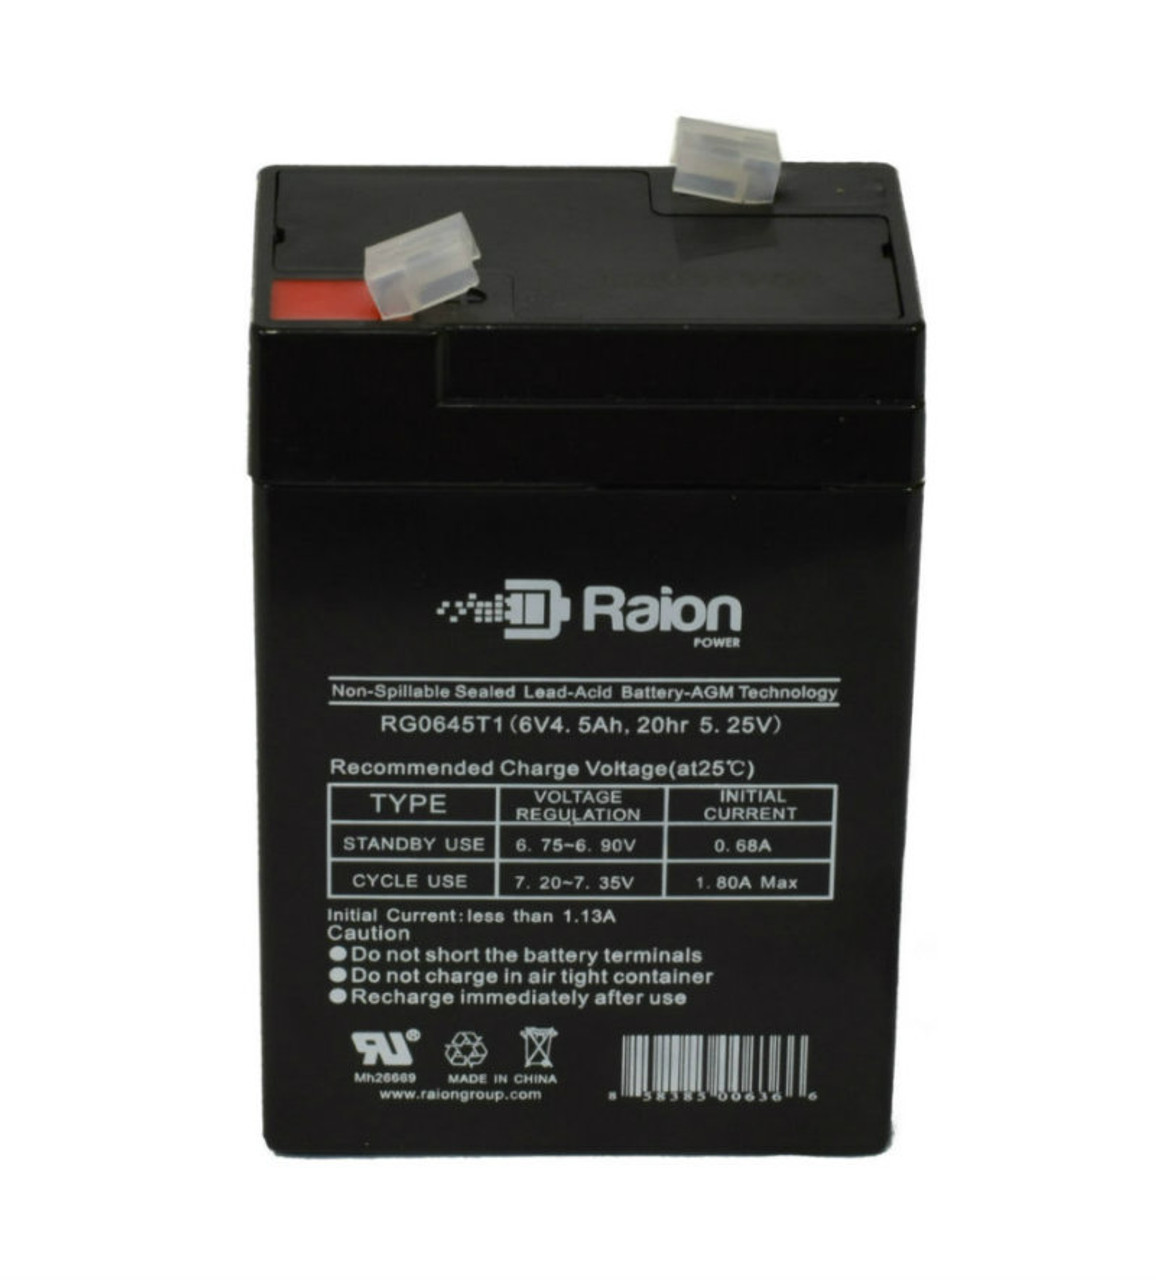 Raion Power RG0645T1 Replacement Battery Cartridge for Lithonia AQM